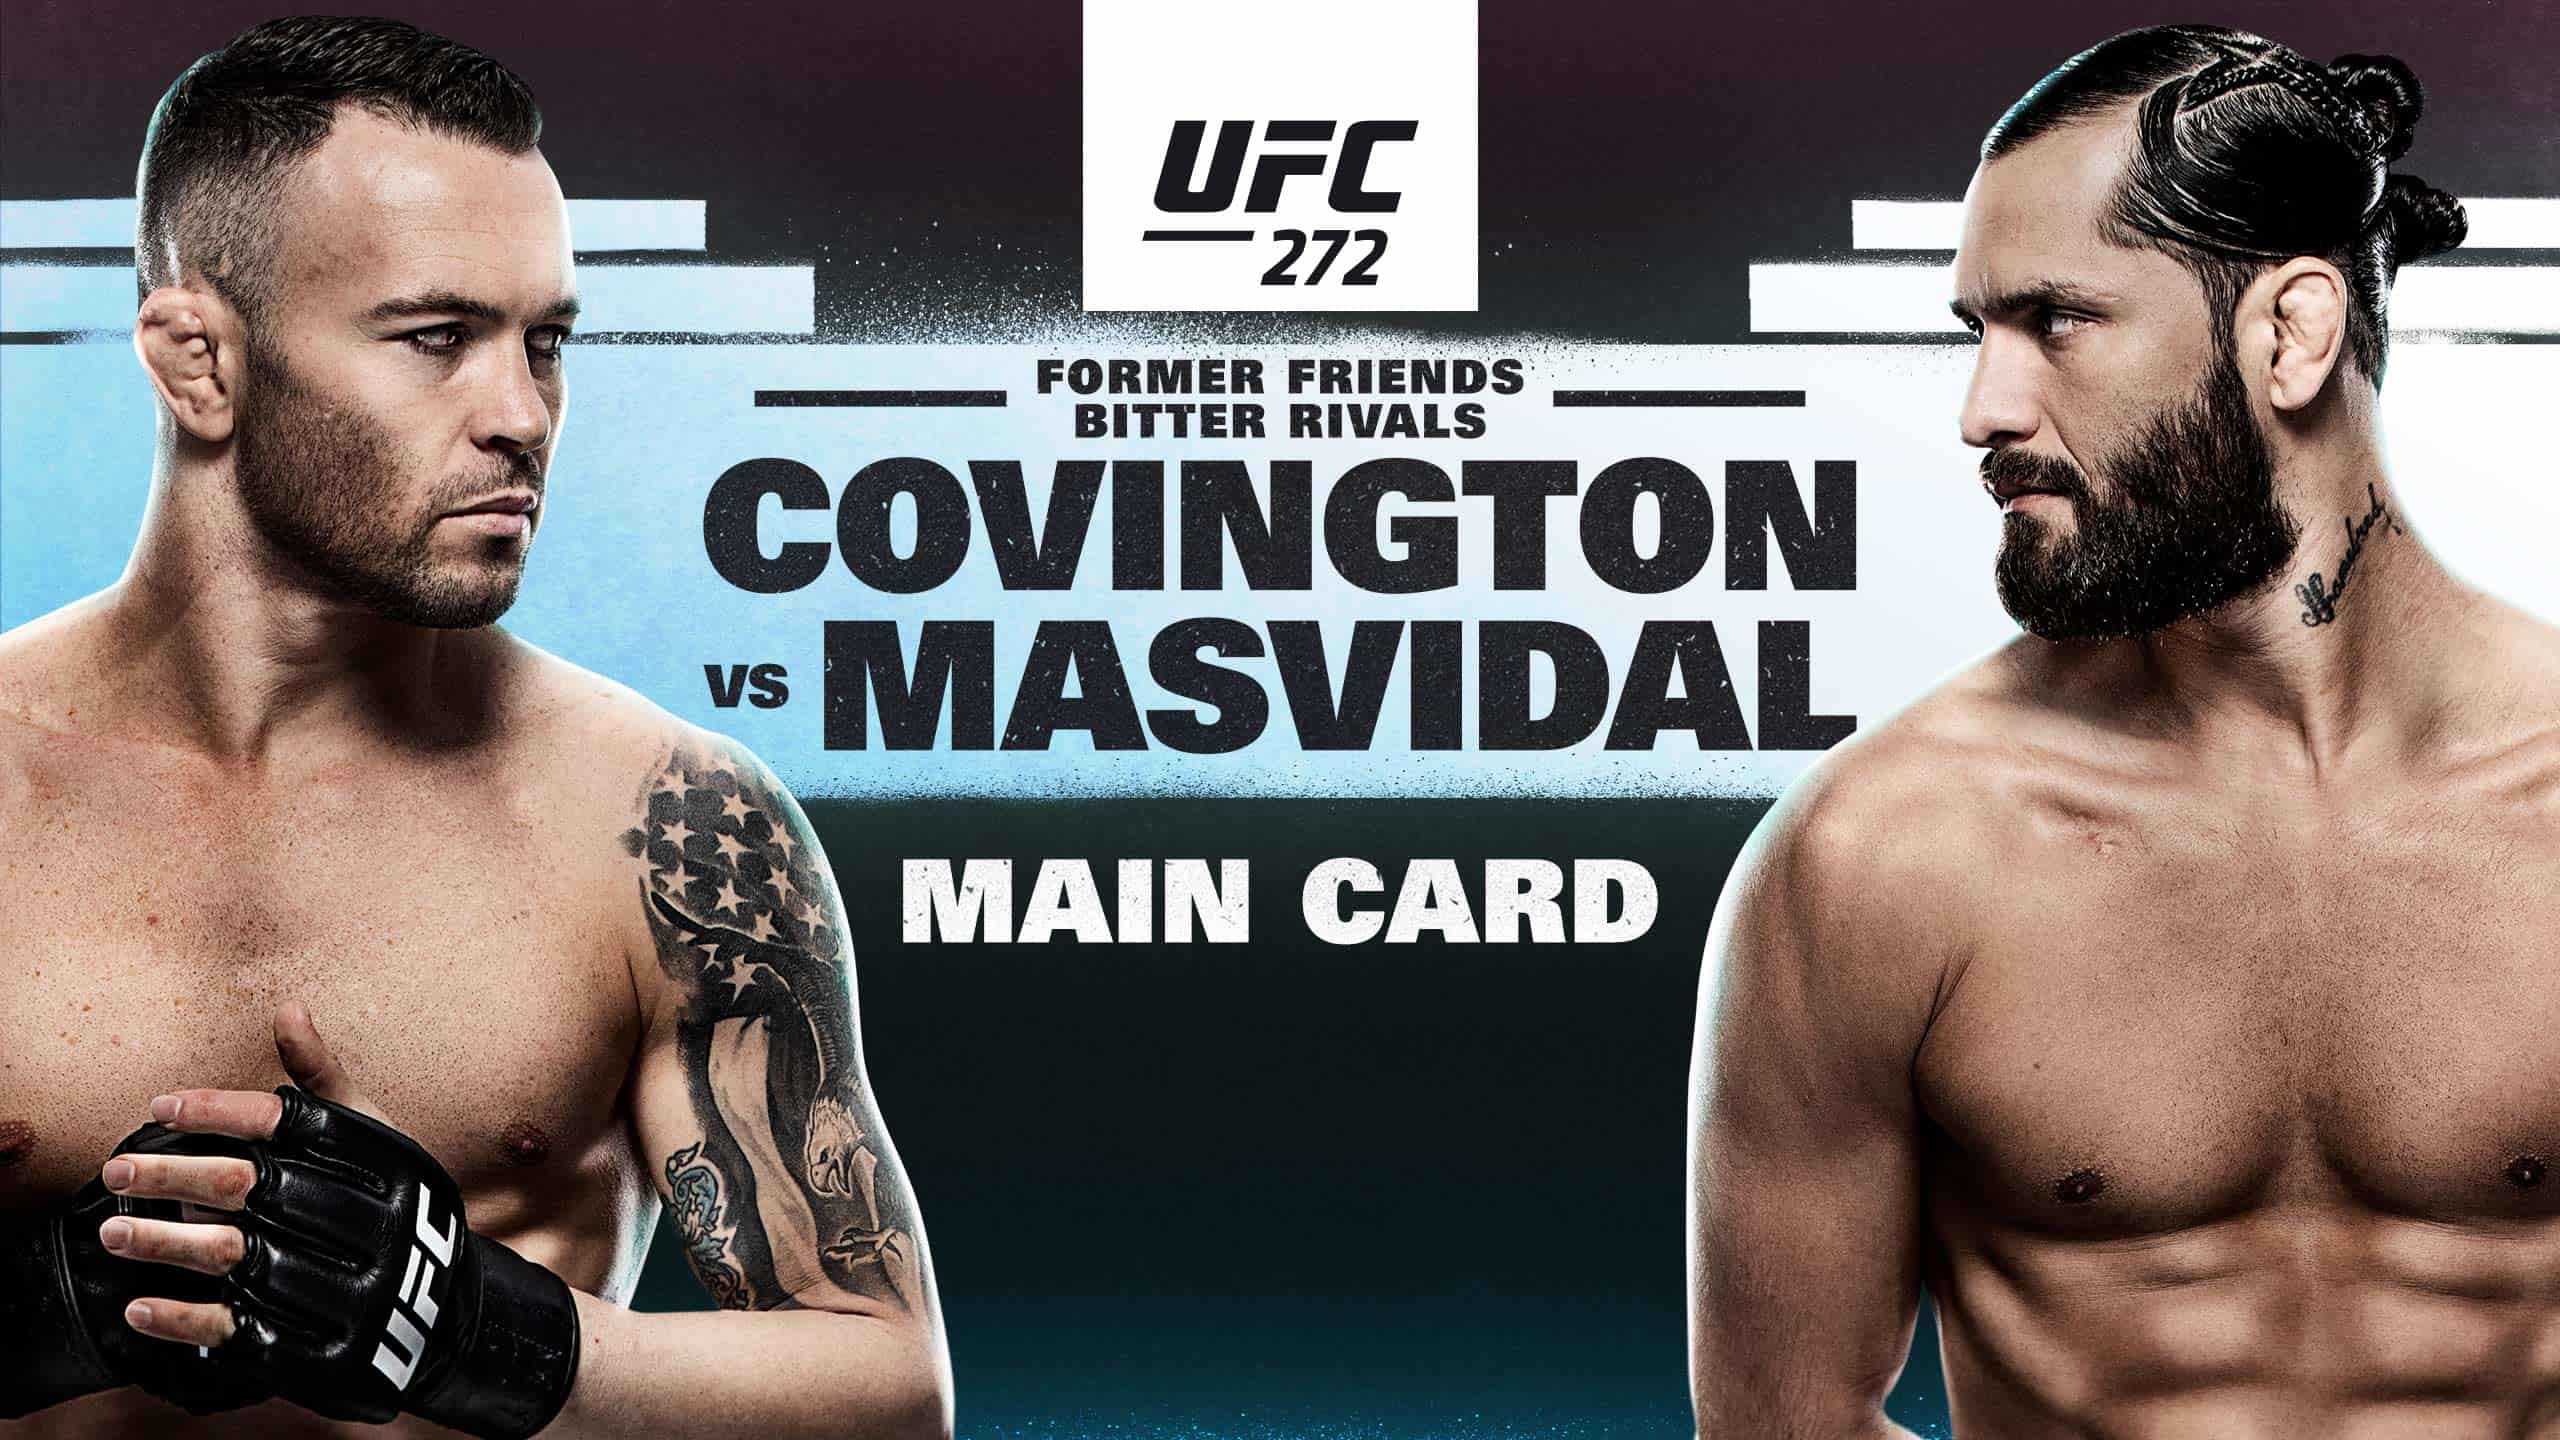 Watch "UFC 272" free live streaming on Reddit Film Daily